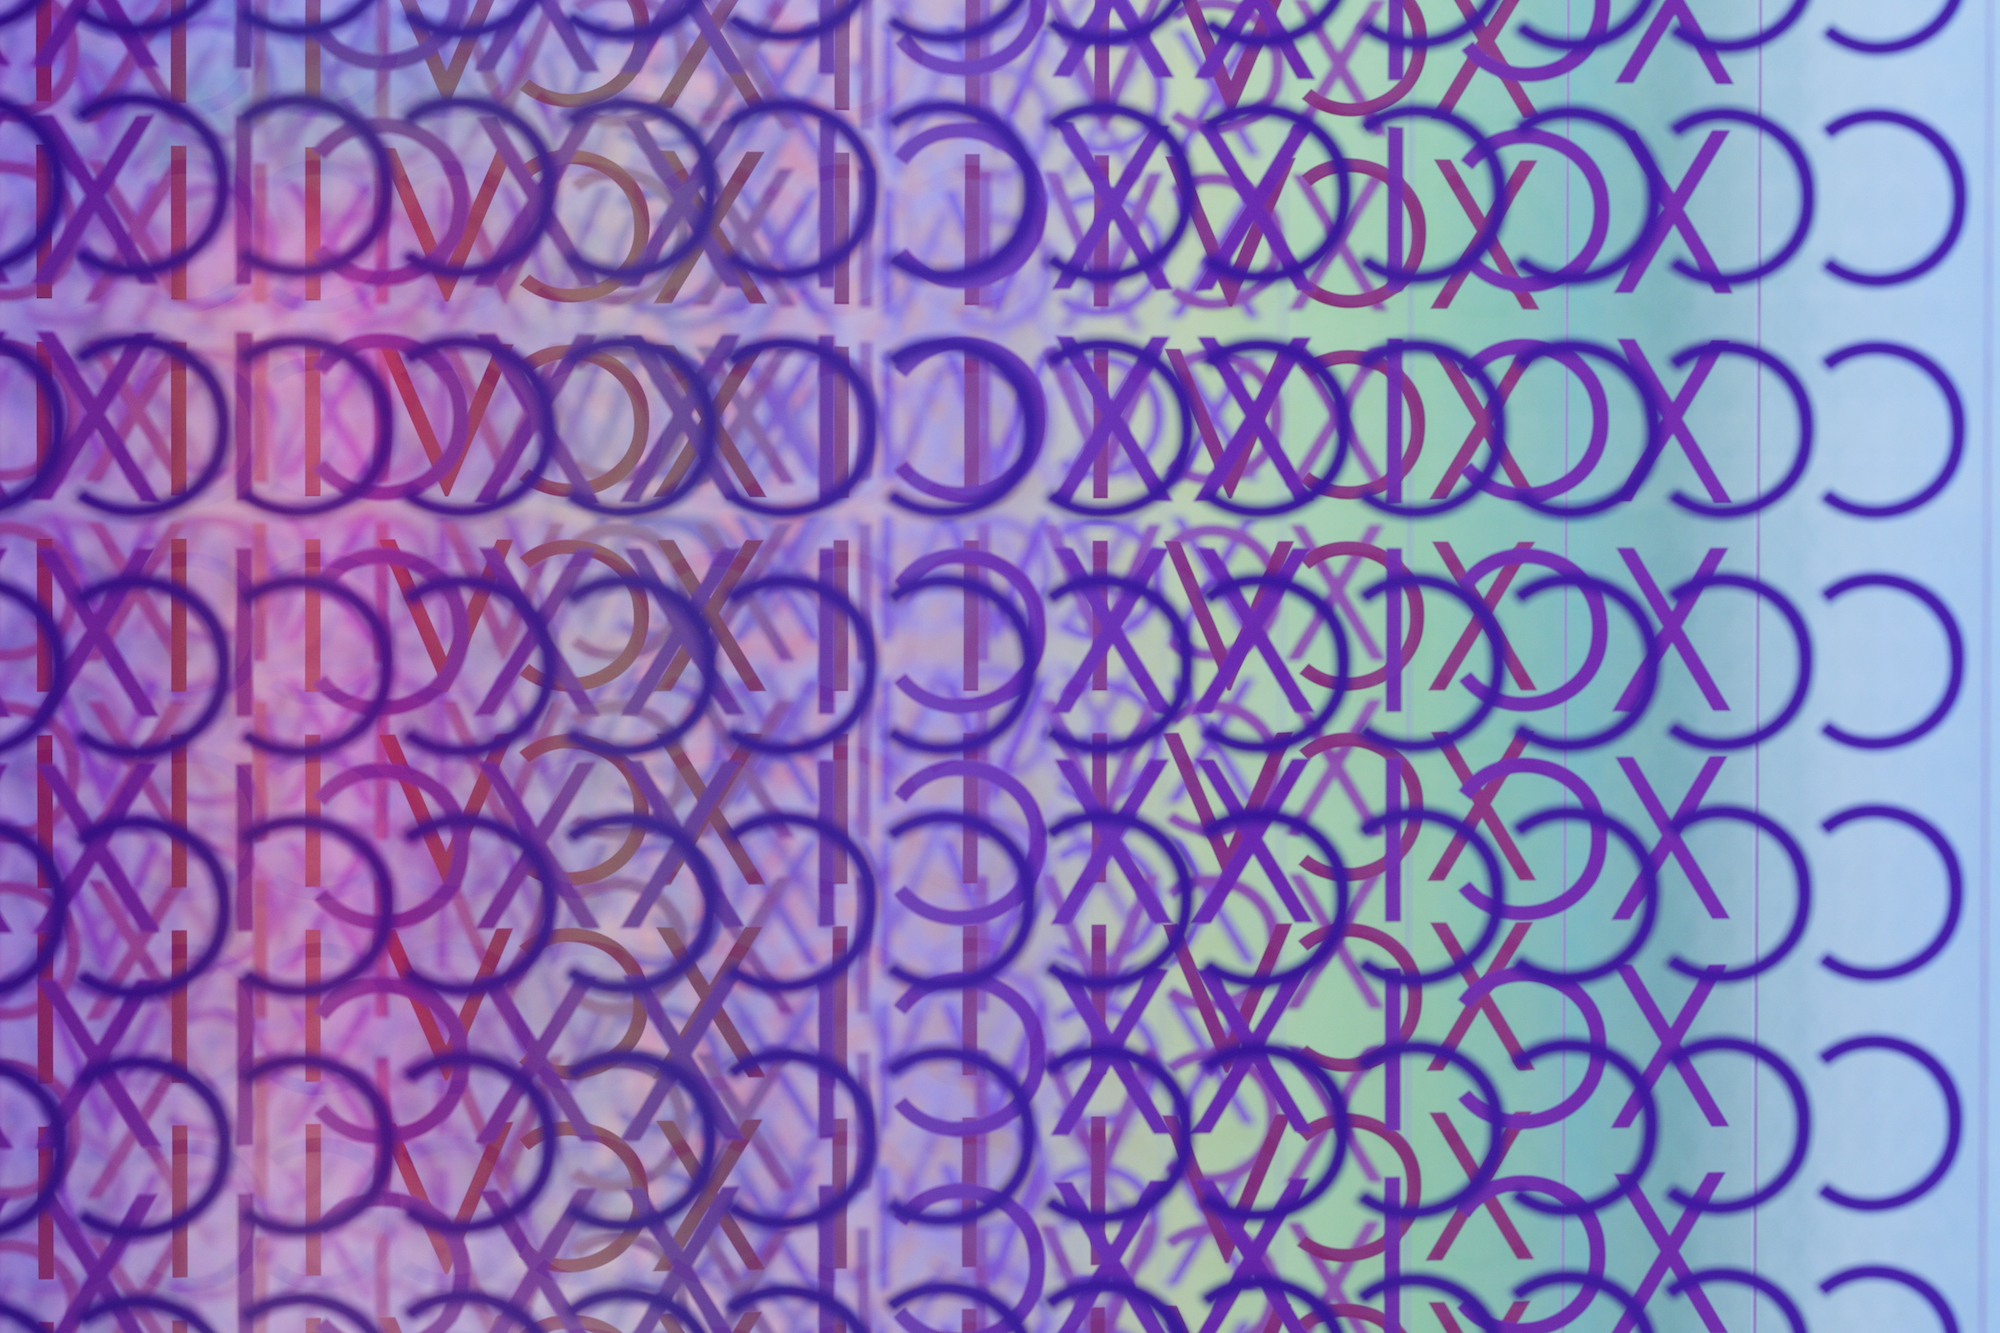 A detail of a large-scale installation of thousands of colorful Roman numerals, showing mostly purple letters.